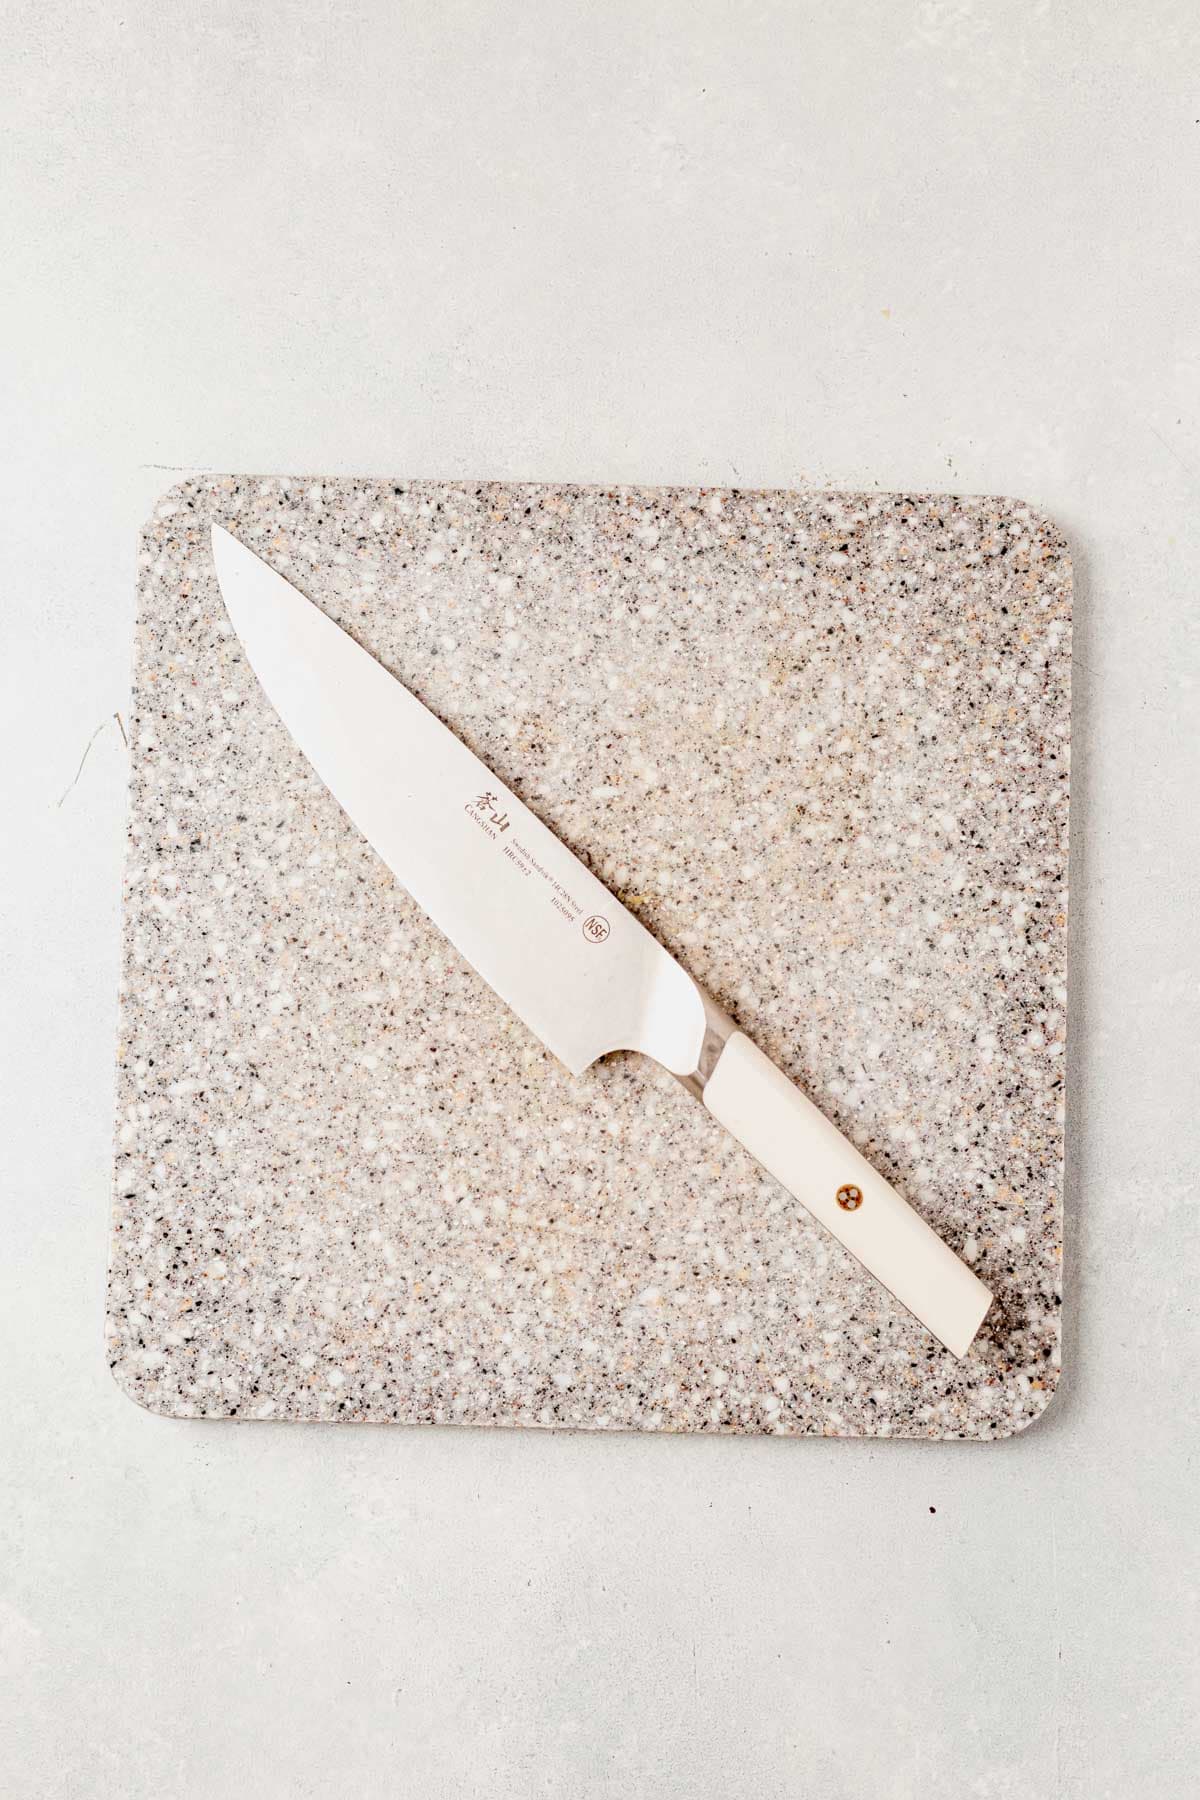 cutting board and sharp knife on a countertop